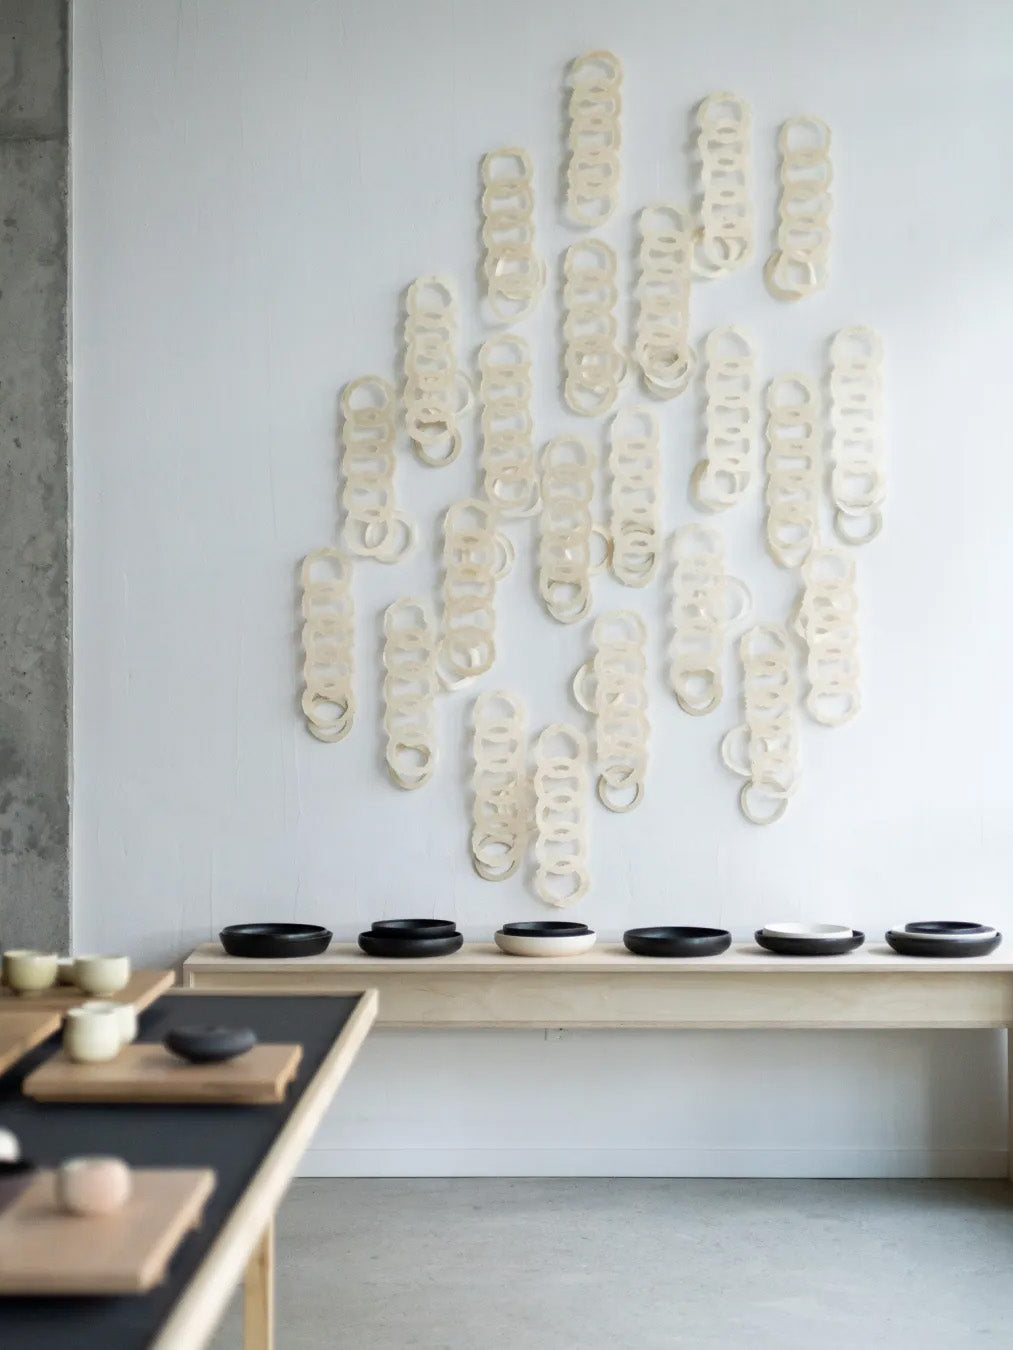 Ebb & Flow – Ceramics and Artwork by Janice Wong